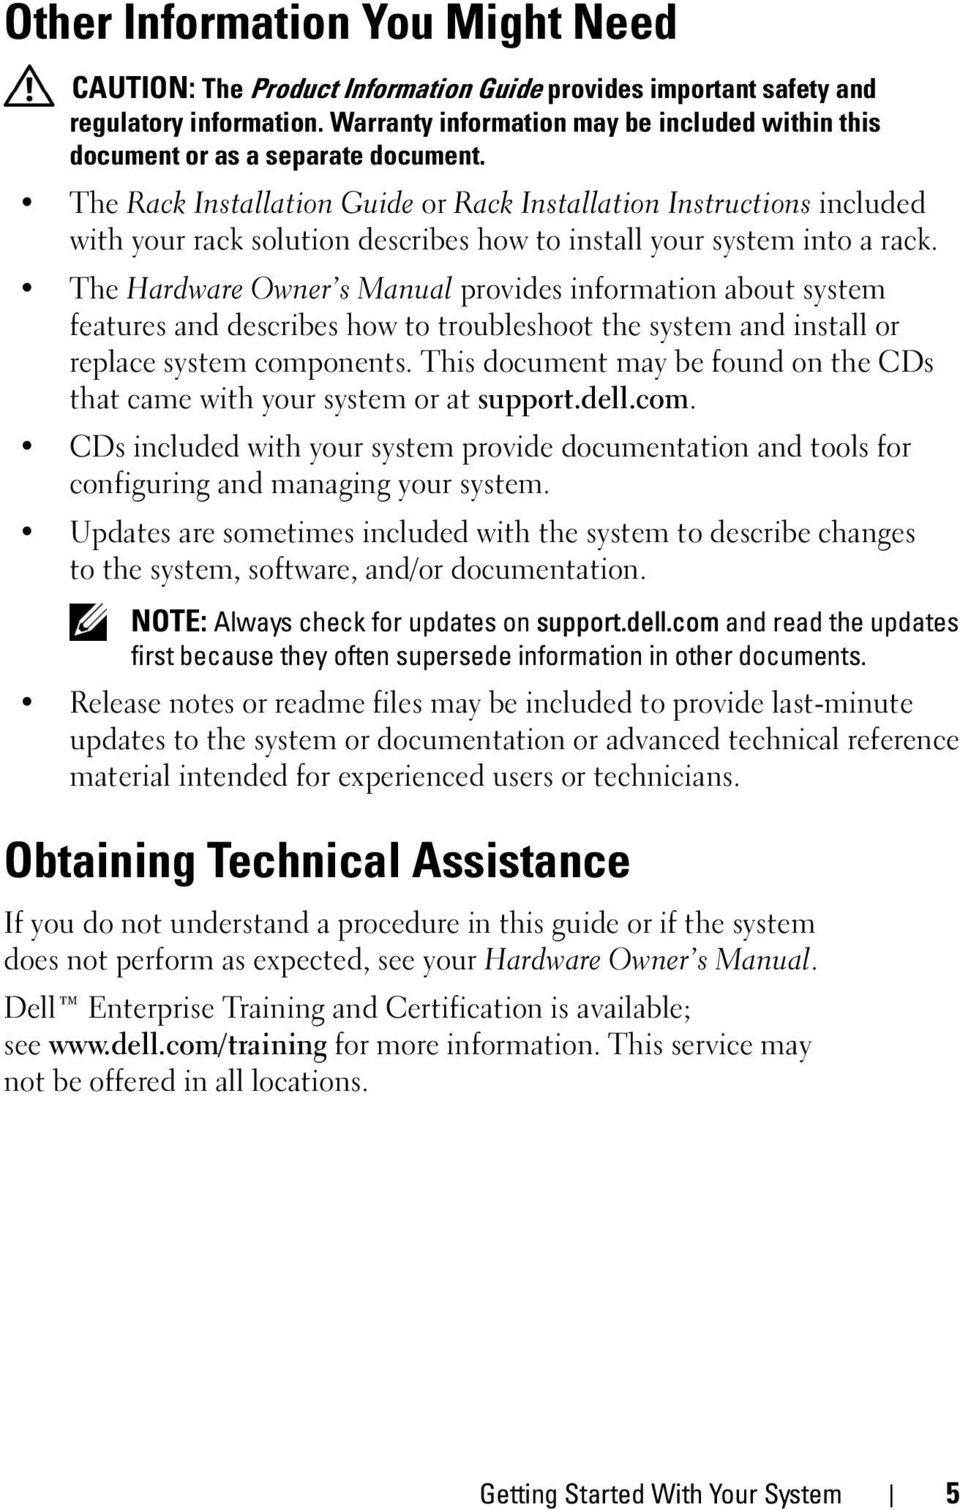 The Rack Installation Guide or Rack Installation Instructions included with your rack solution describes how to install your system into a rack.